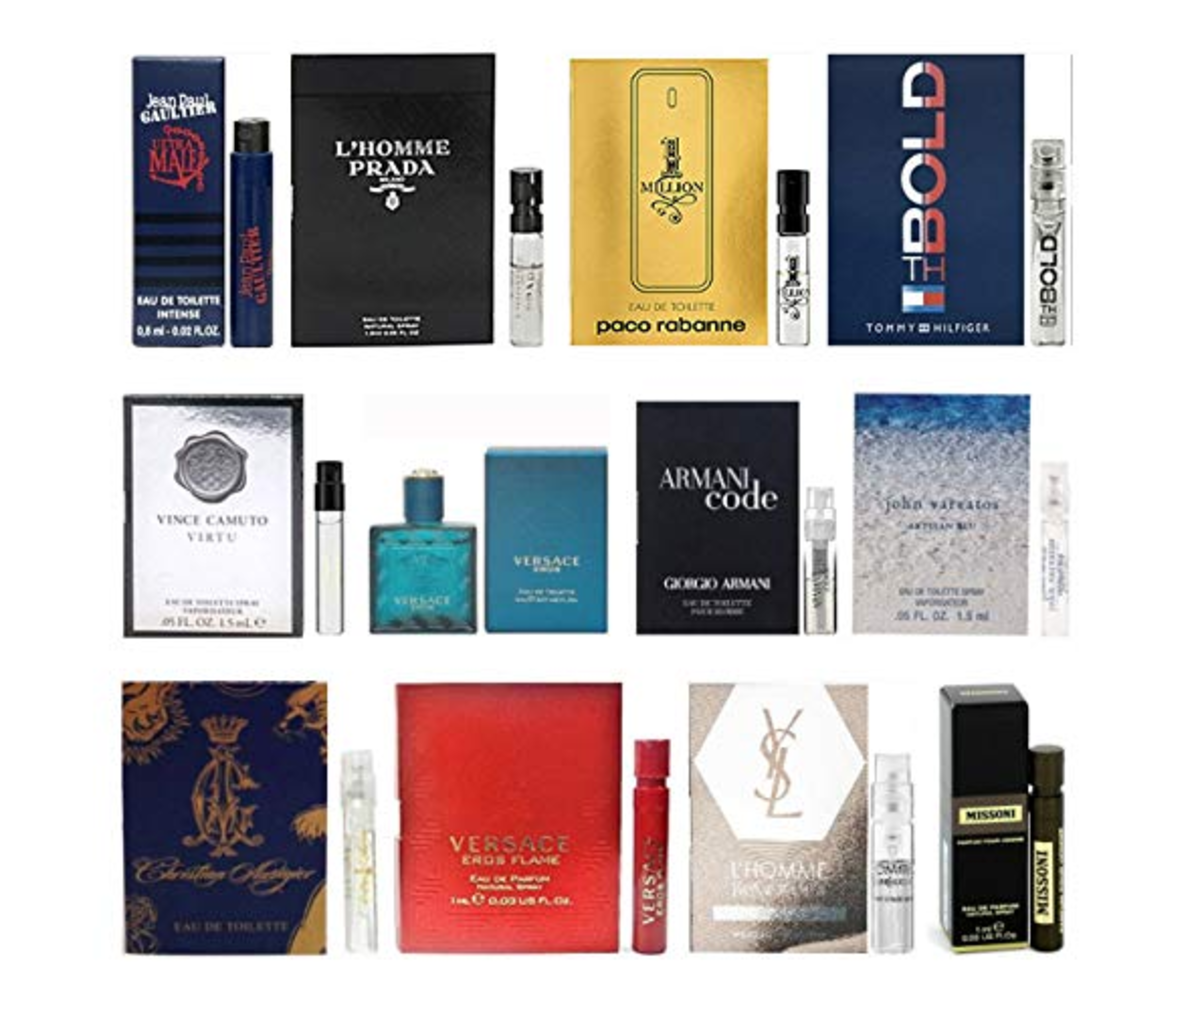 This collection includes some fragrances that are more traditionally masculine.